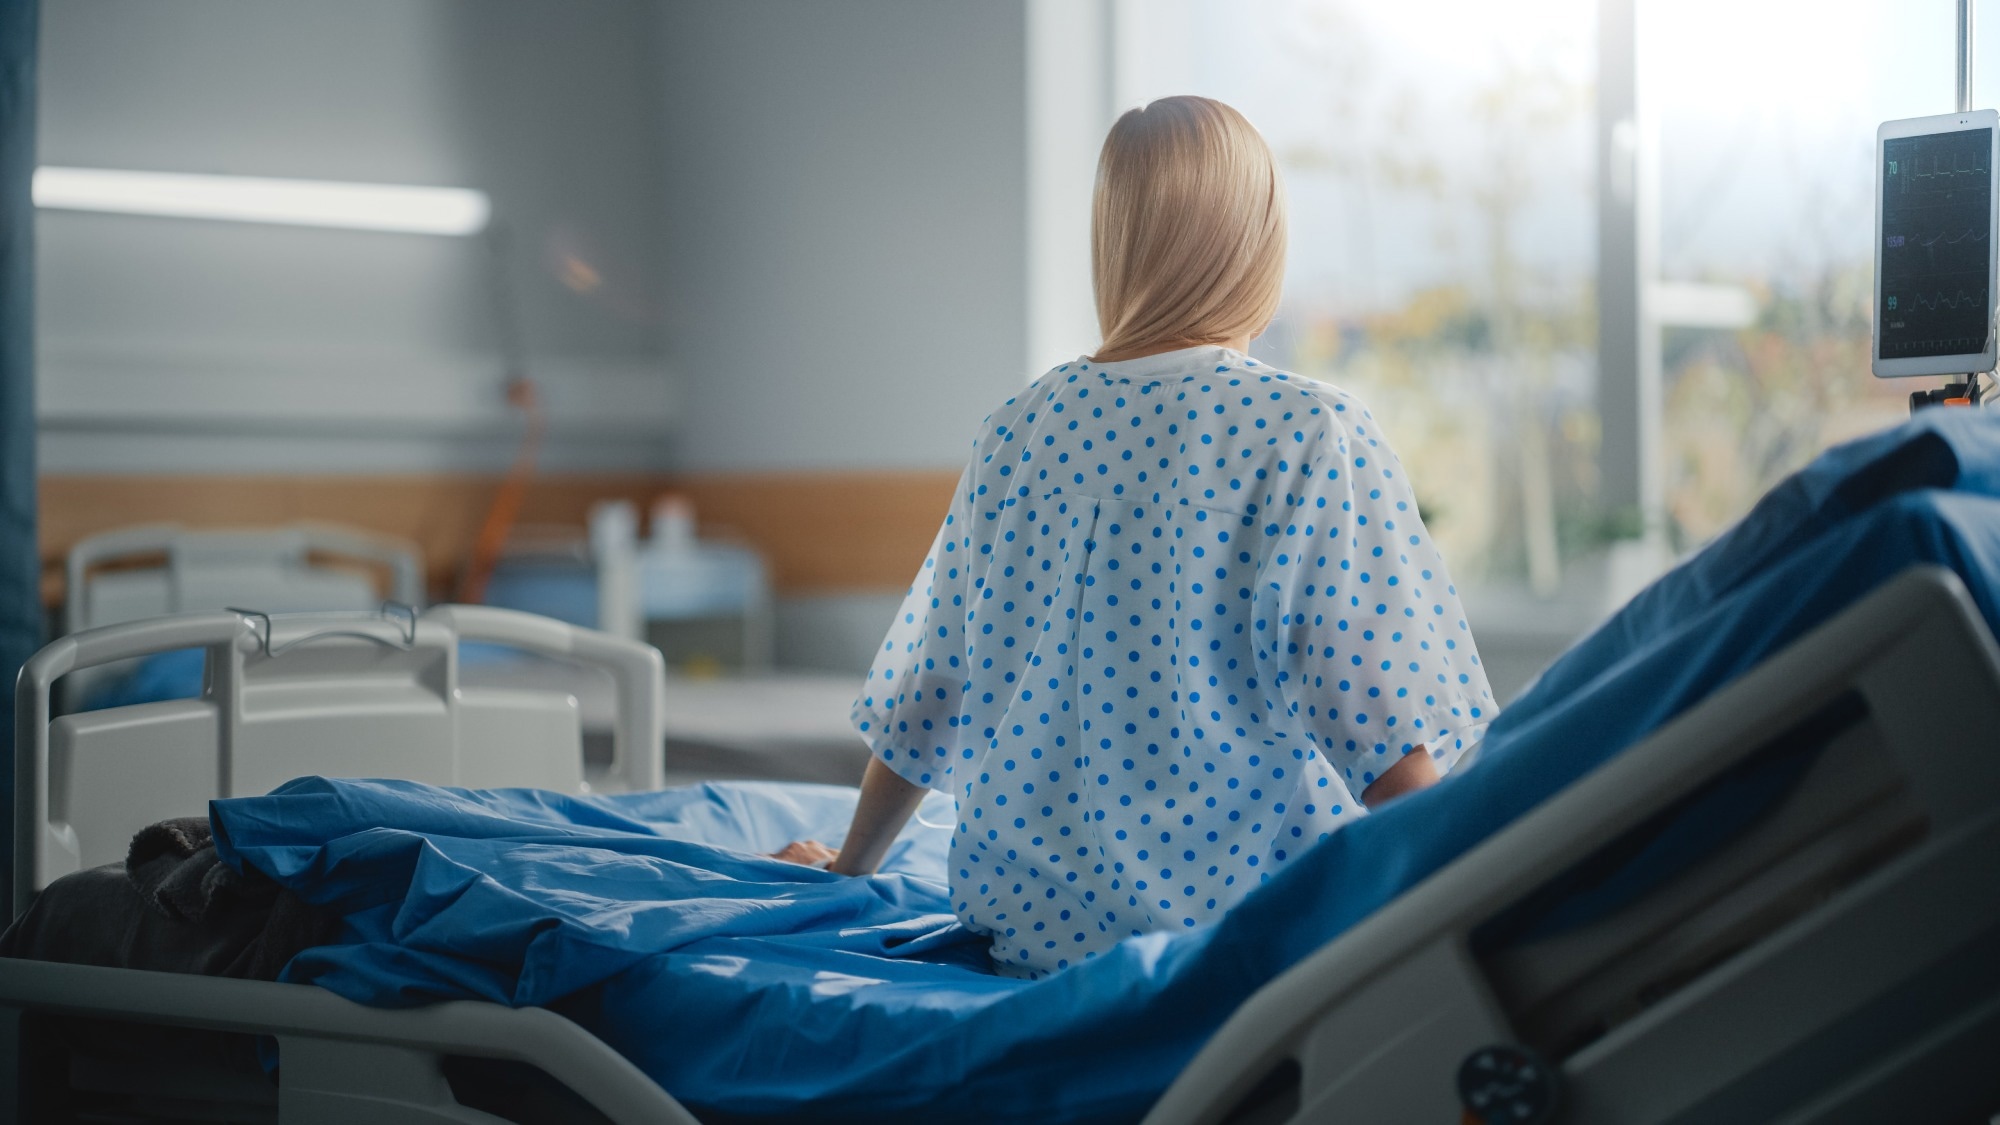 Study: Impact of the COVID-19 pandemic on the incidence and type of infections in hospitalized patients with cirrhosis: A retrospective study. Image Credit: Gorodenkoff / Shutterstock.com